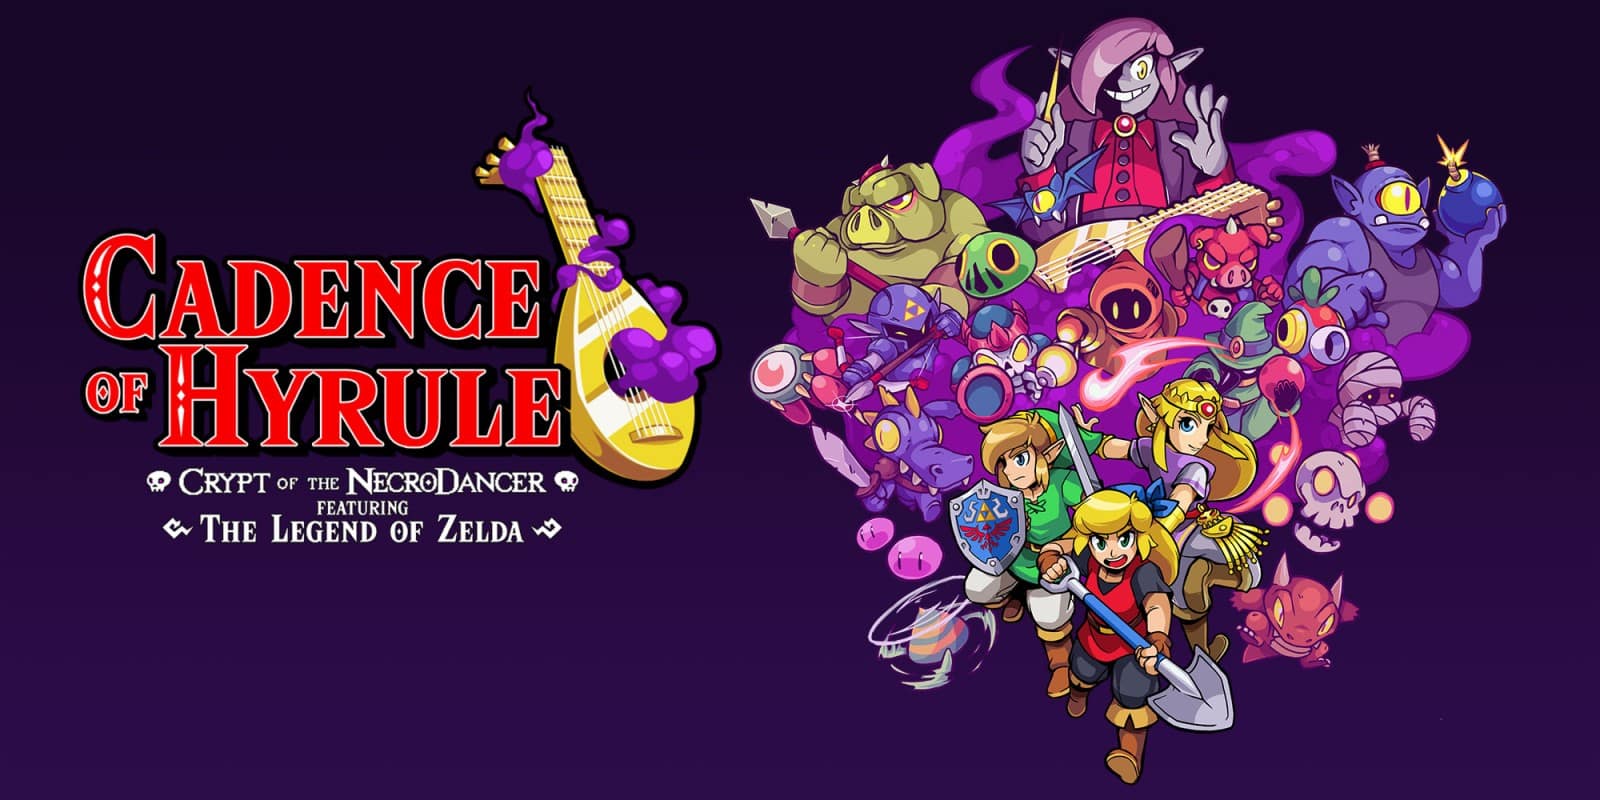 giochi musicali sanremo Cadence of Hyrule – Crypt of the NecroDancer Featuring The Legend of Zelda